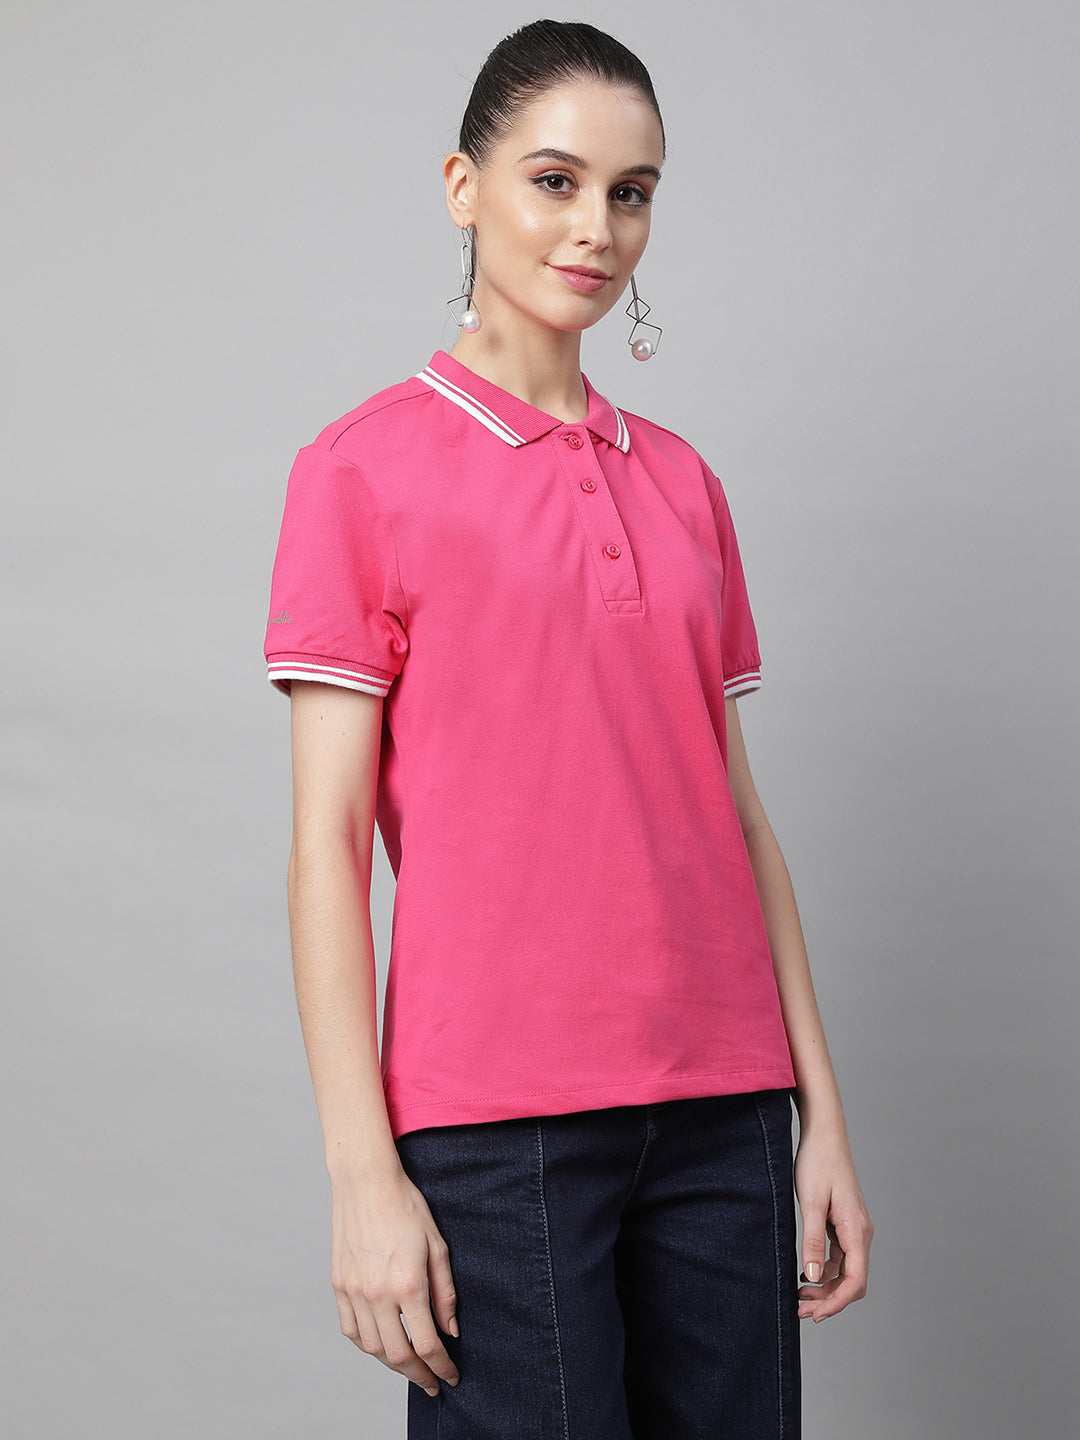 women hot pink cotton solid top